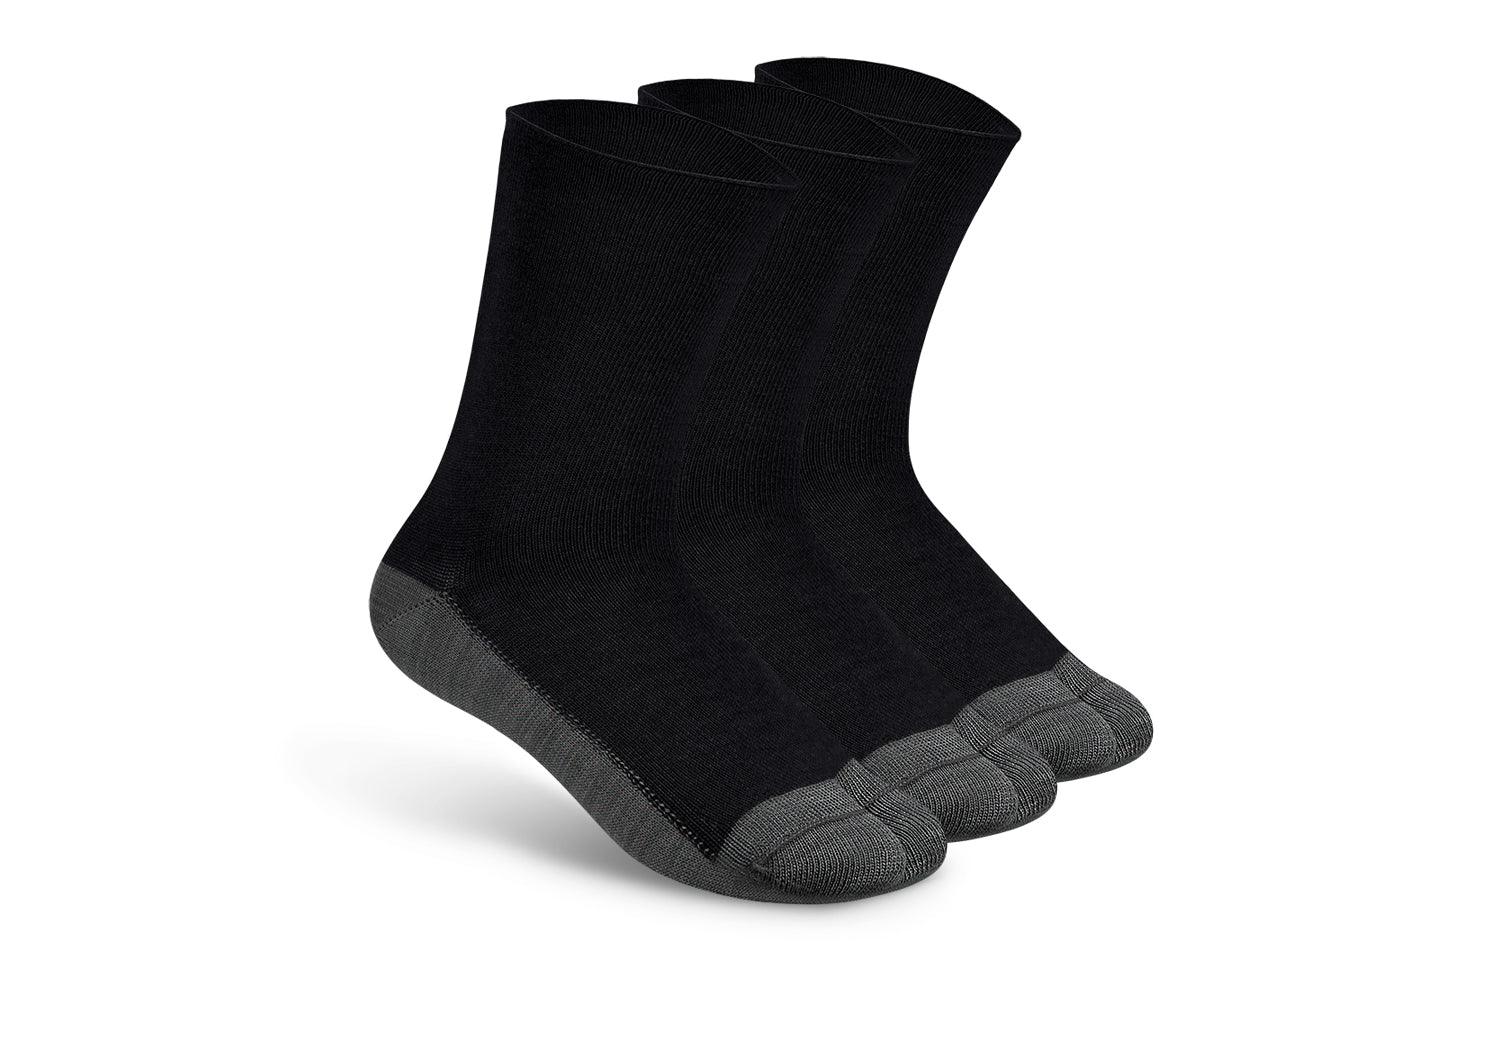 OrthoSleeve Bunion Relief Socks, Patented Split-Toe Design with a Cushioned  Bunion Pad Separates Toes, Relieves Bunion Pain and Reduces Toe Friction